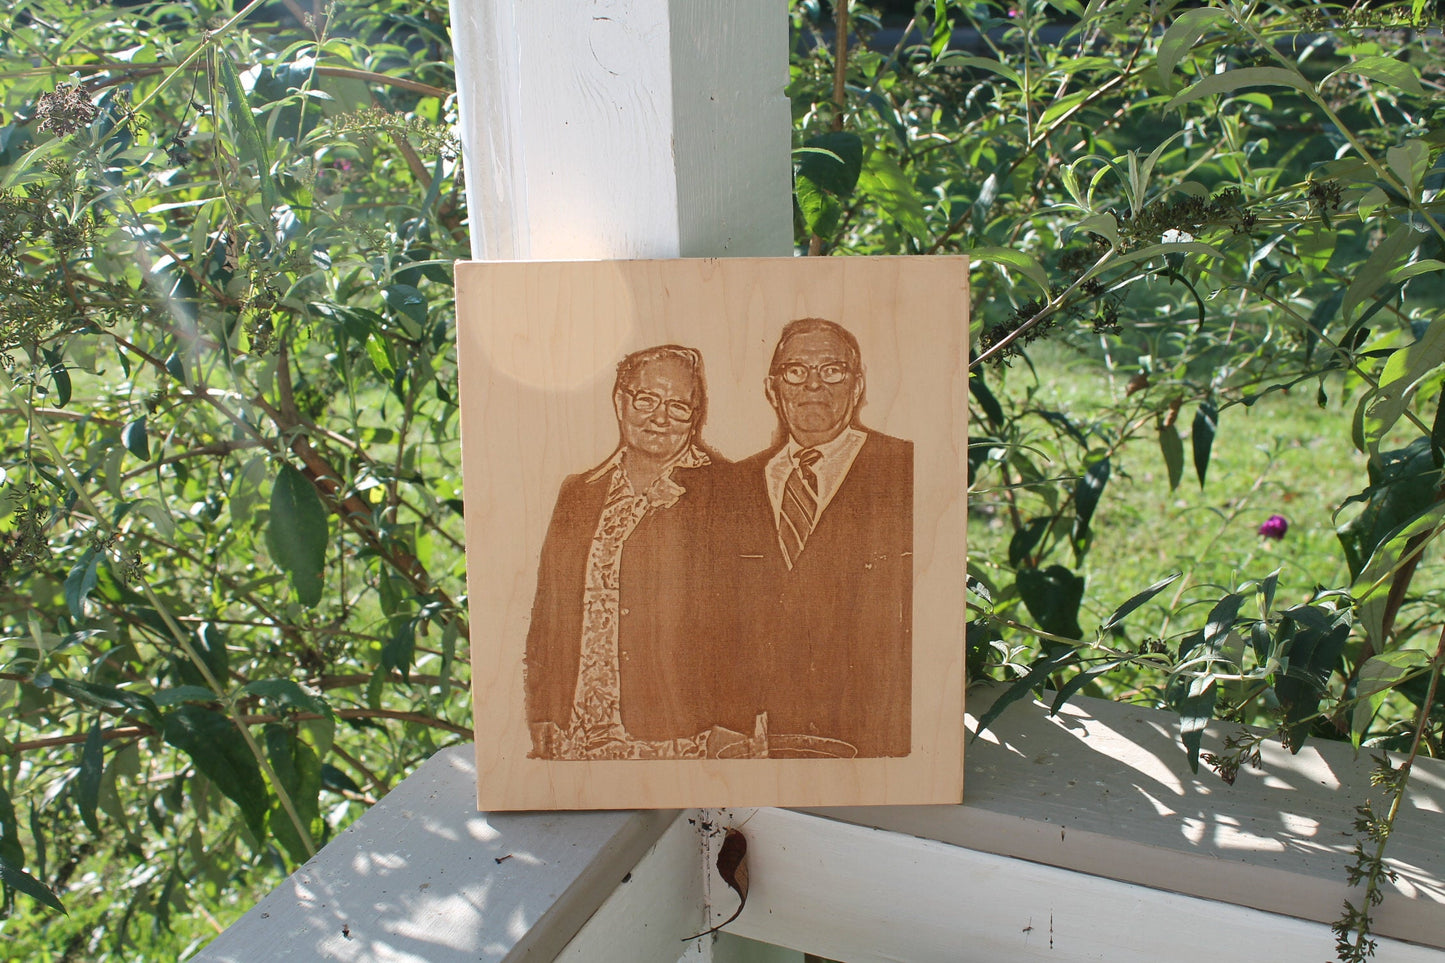 laser etched photo on wooden surface